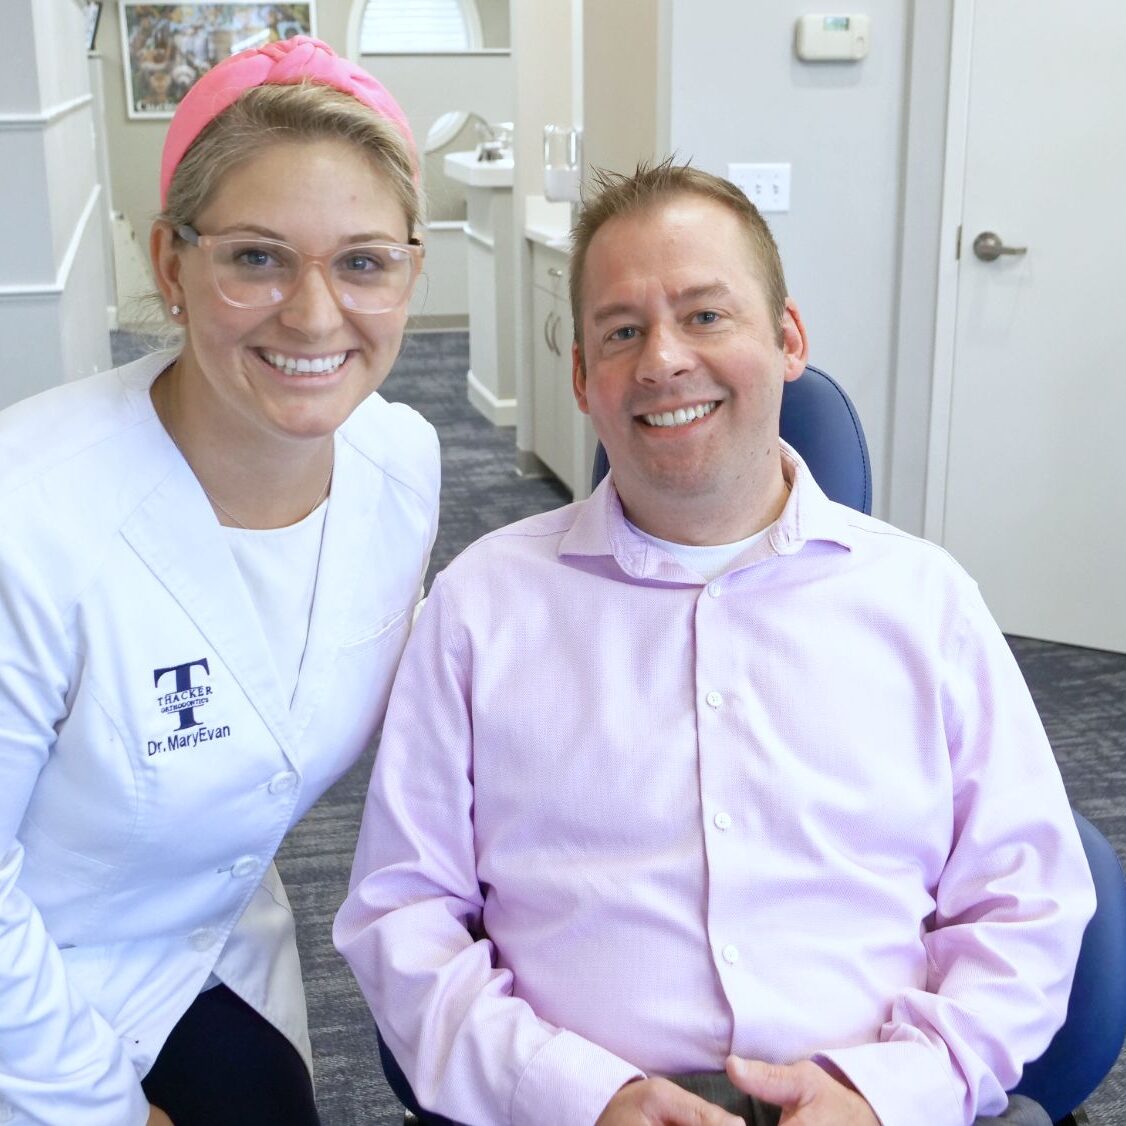 Dr. MaryEvan with a patient